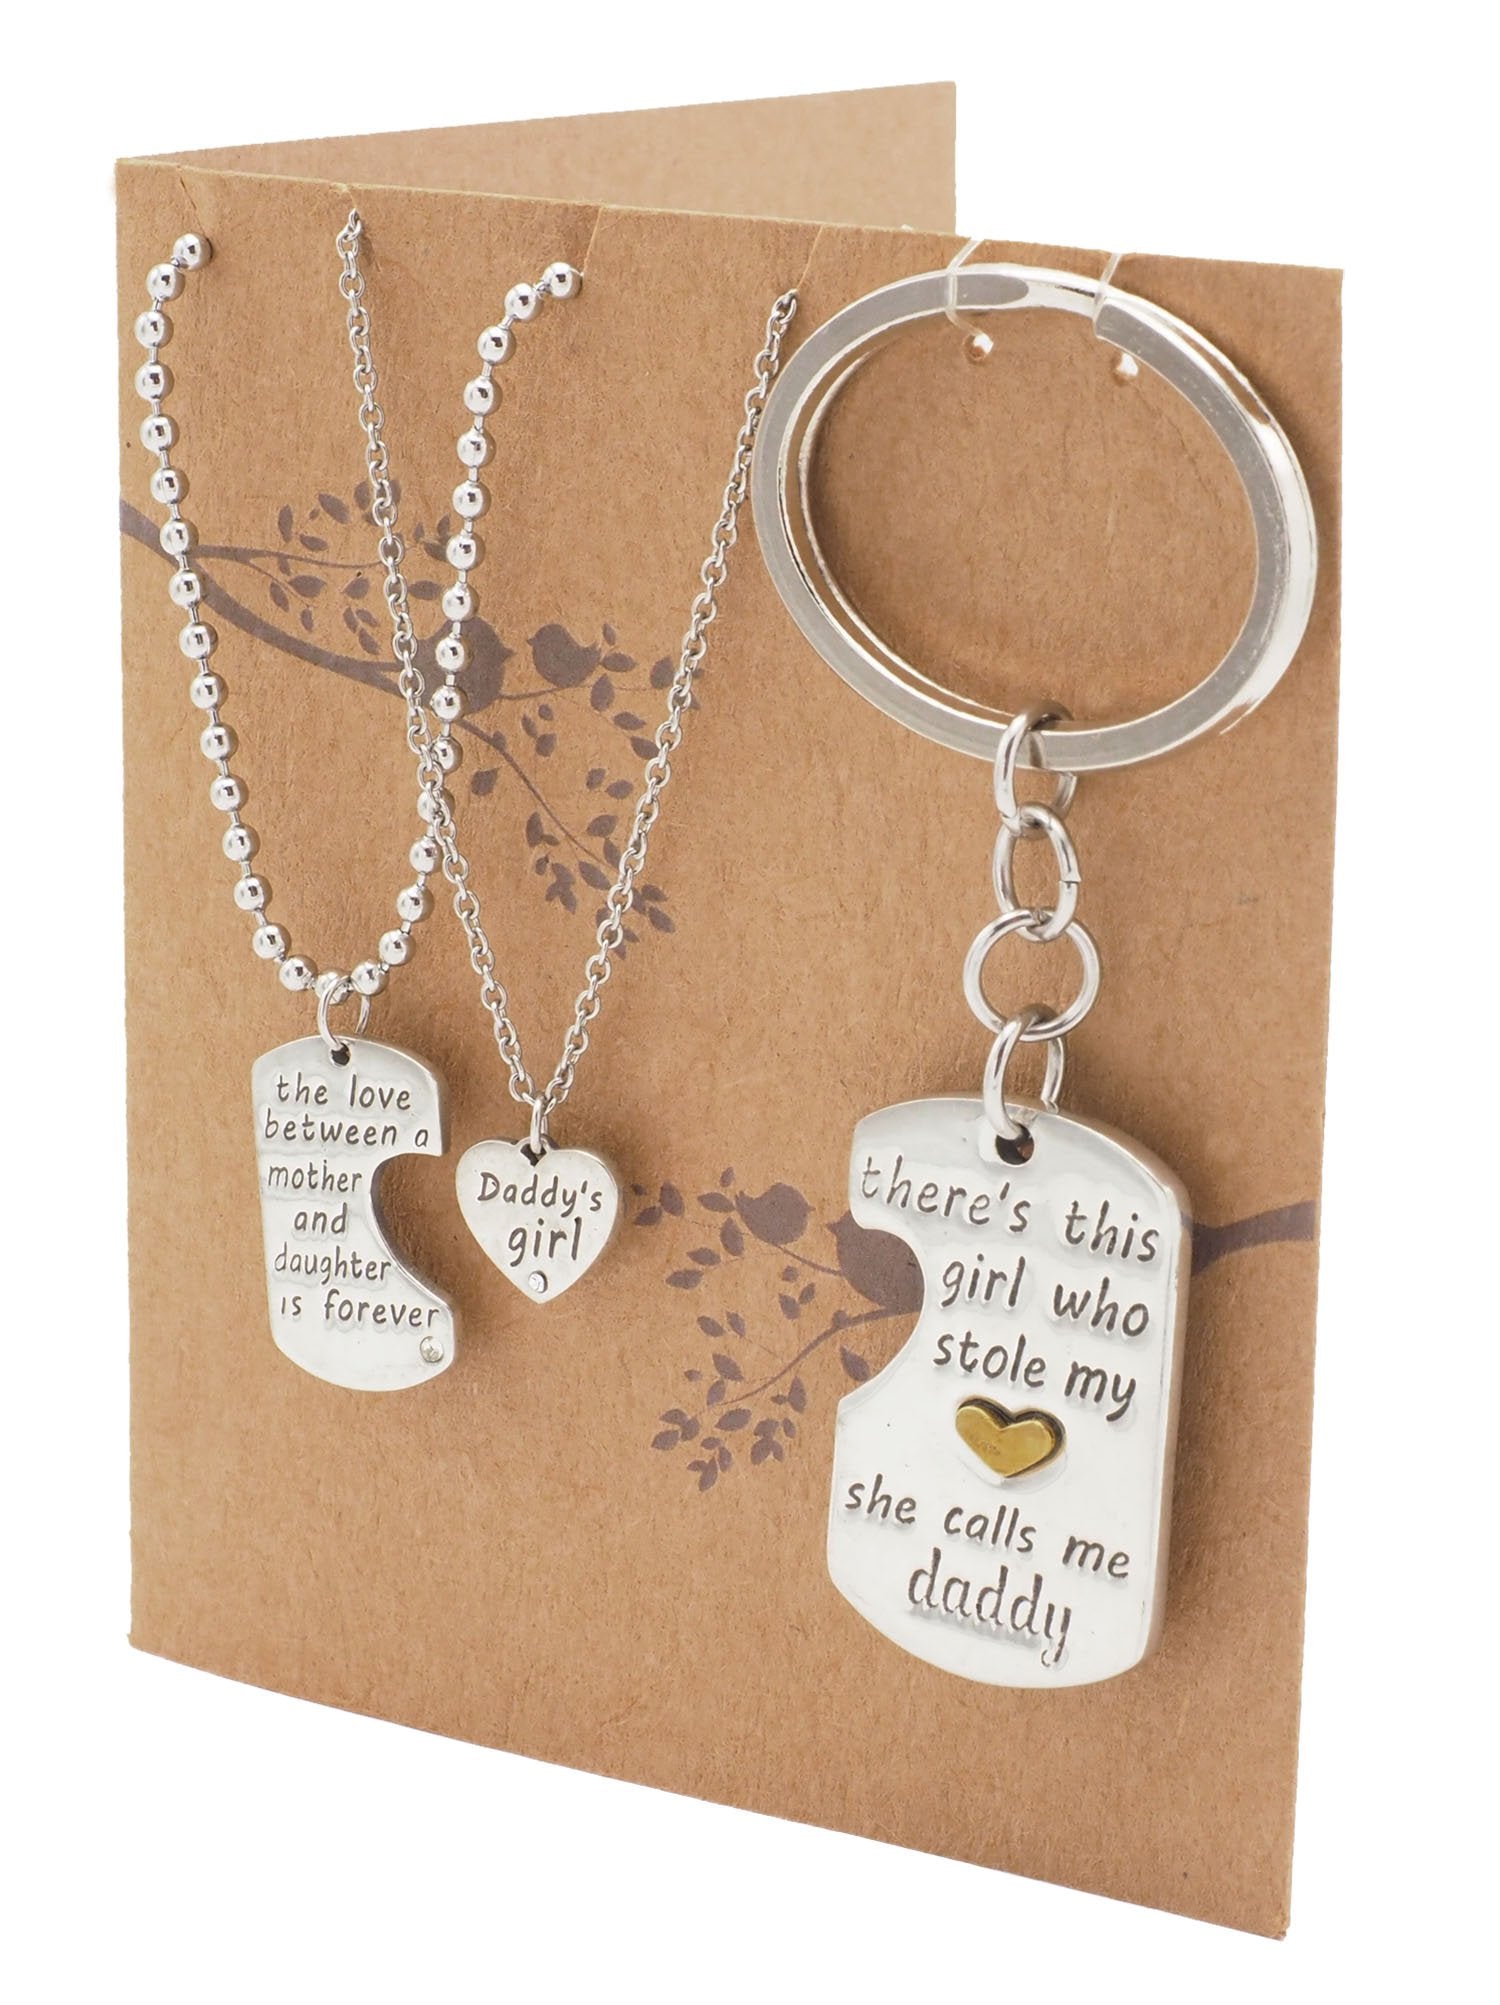 Engraved Gifts for Moms